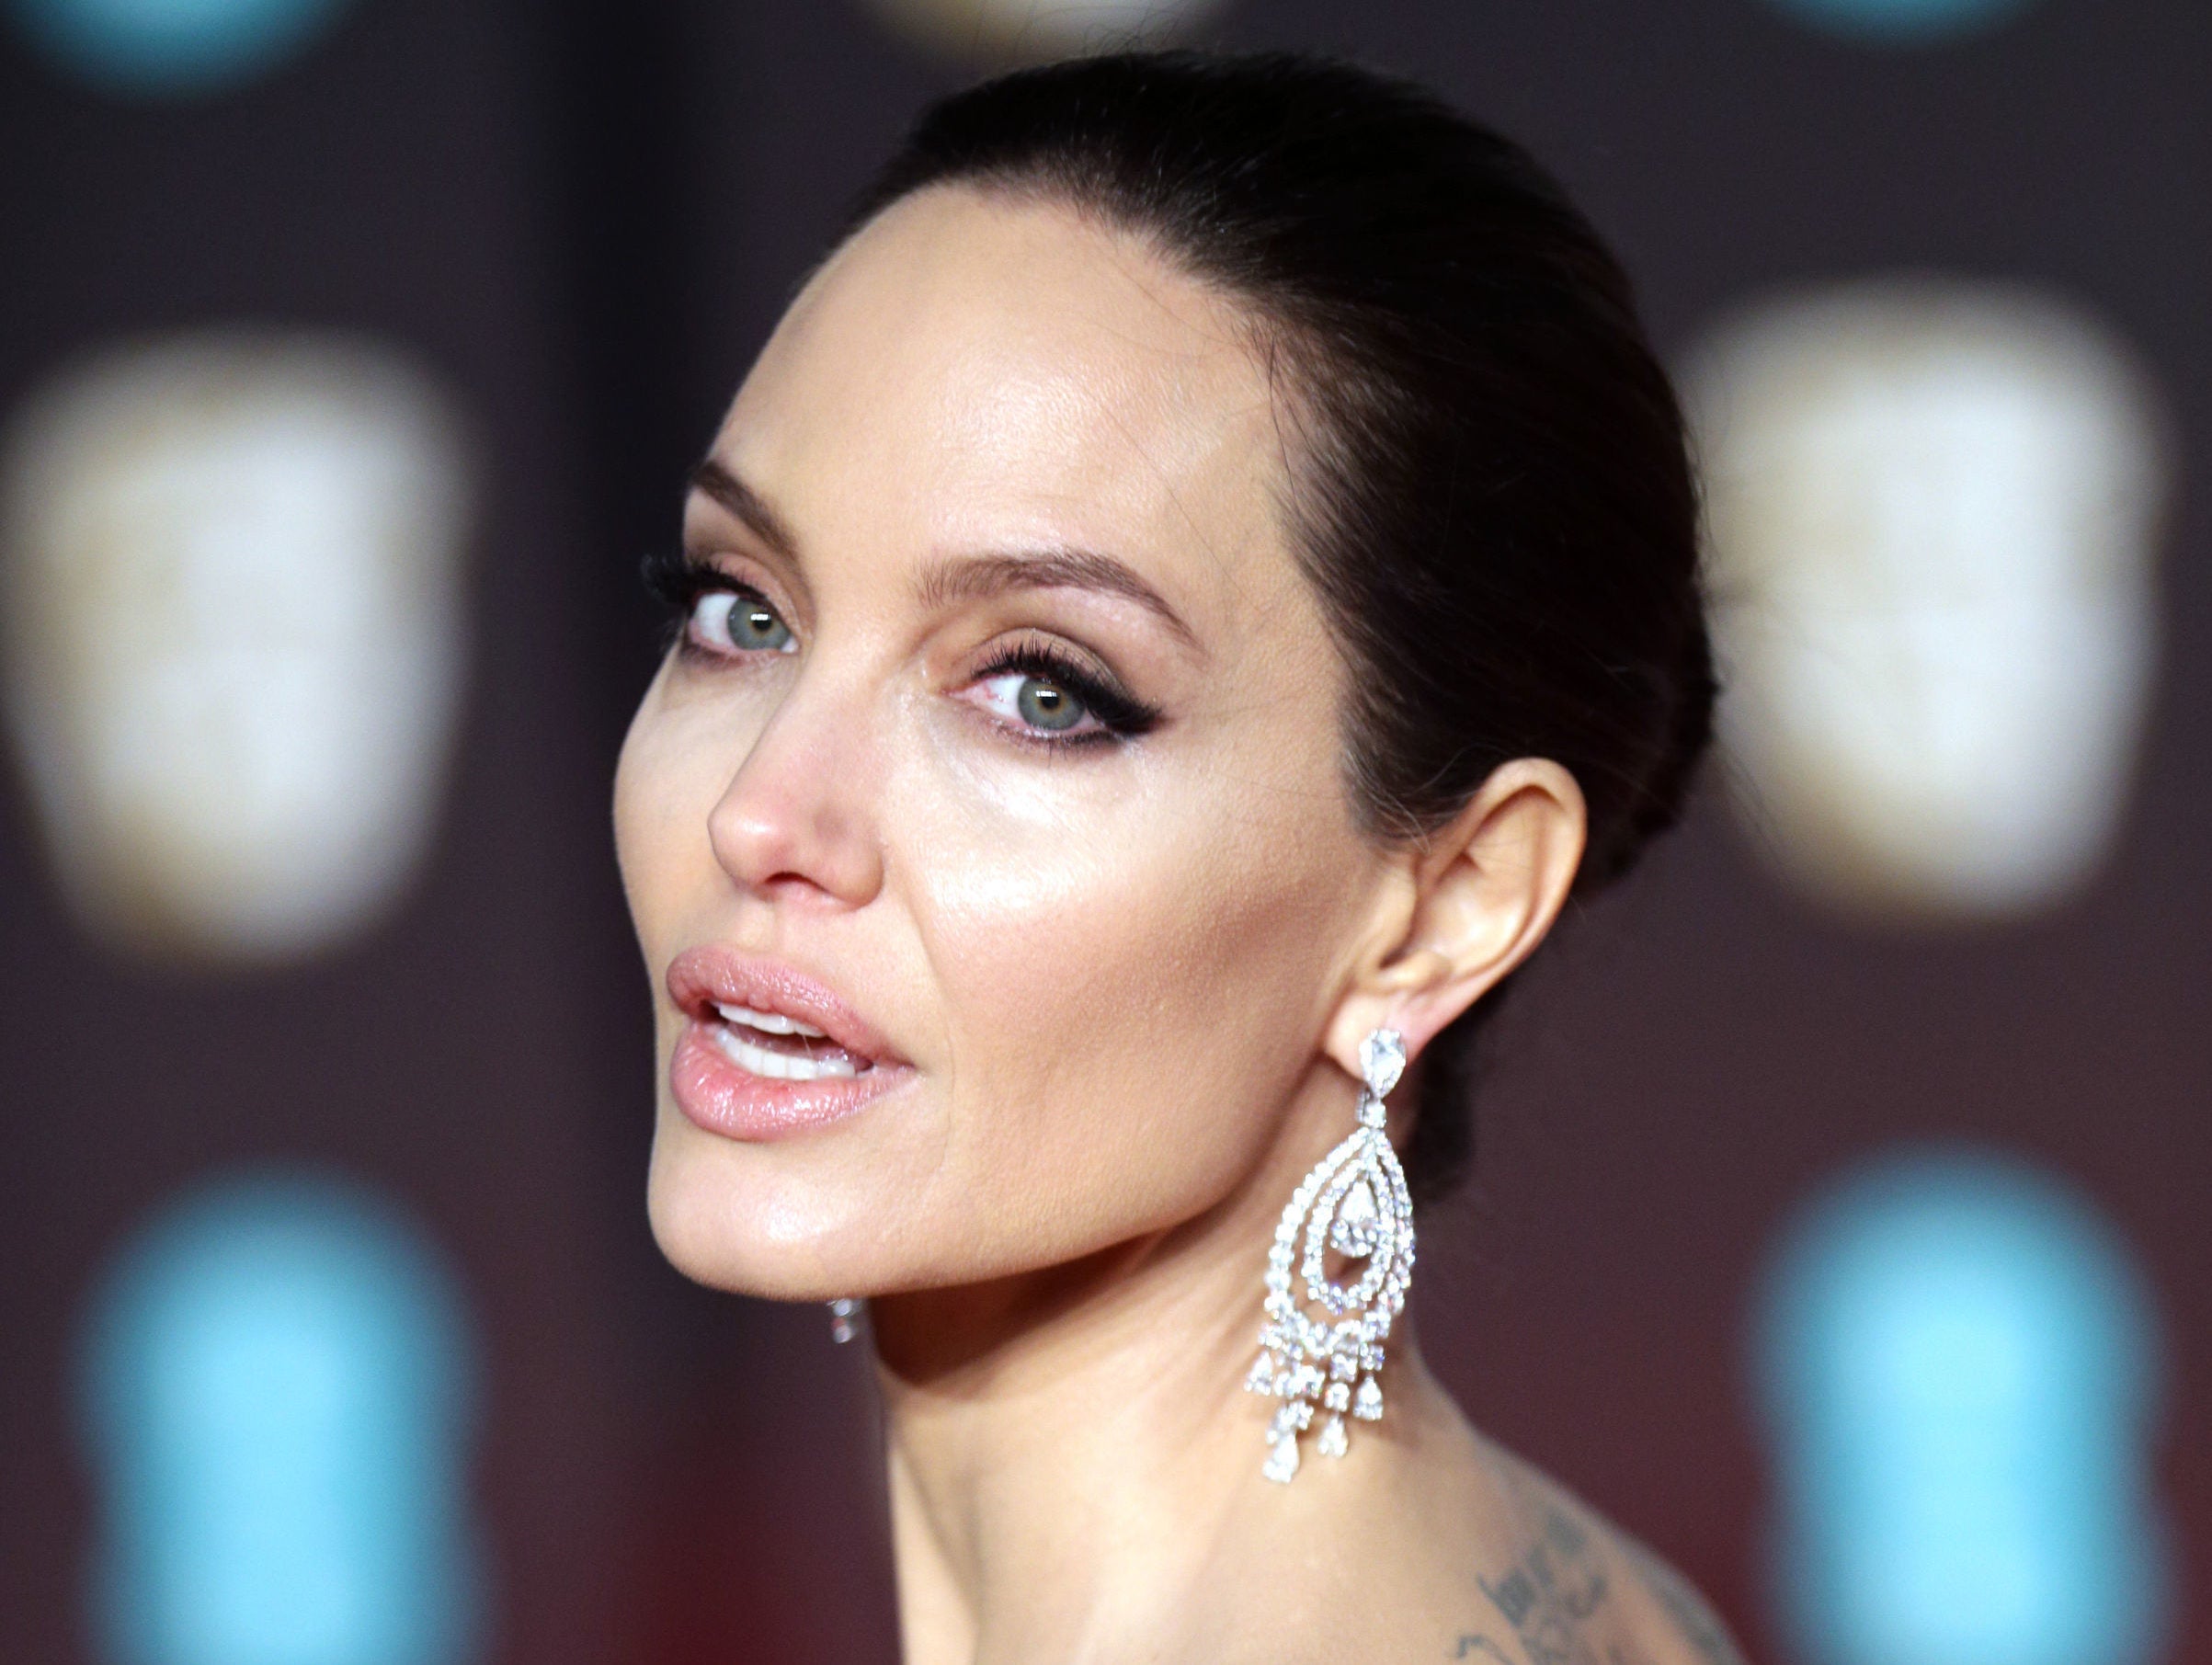 Angelina Jolie lined up for stint as BBC Today programme editor over festive period